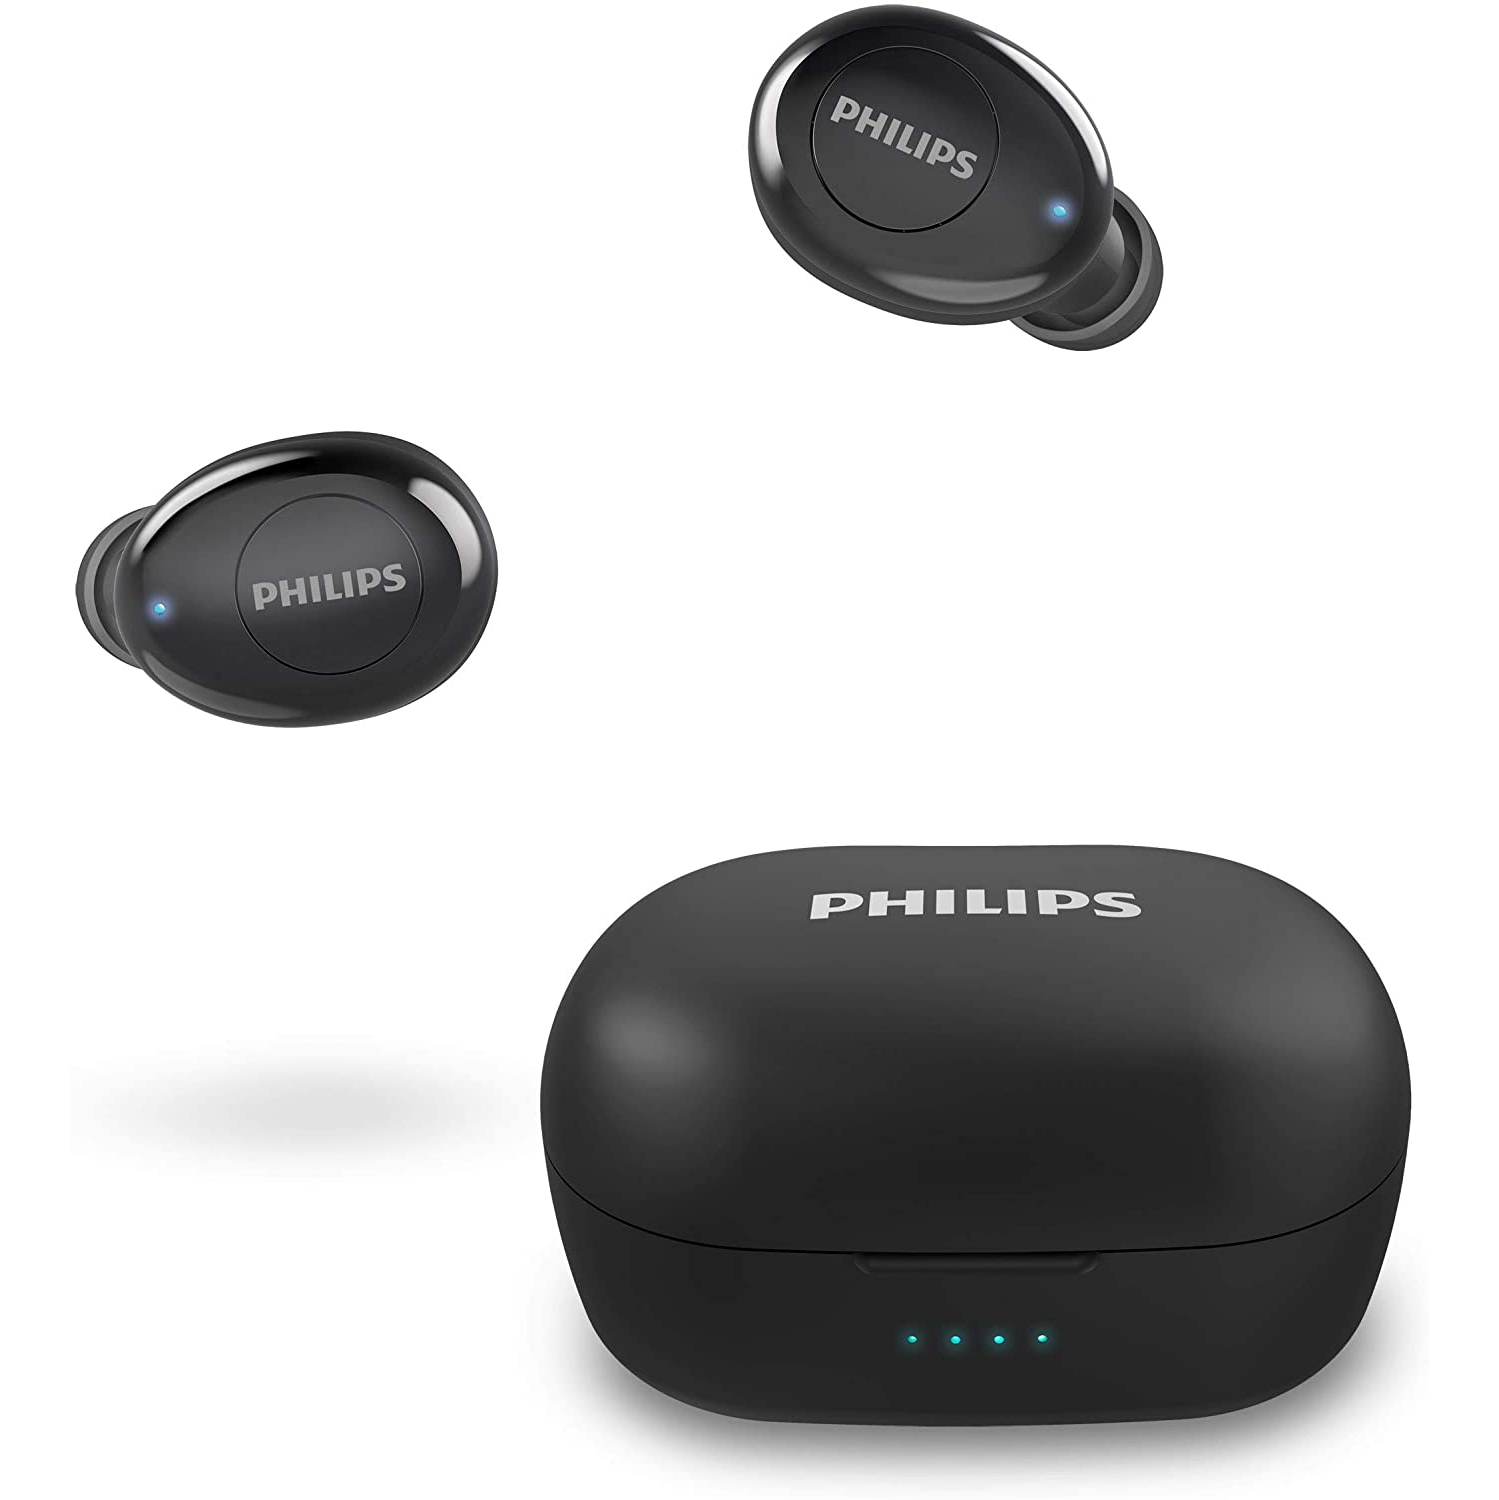 Philips T2205 In-ear True Wireless Headphones with IPX4 Splash Resistant, Portable Charging Case, Built-in Microphone, Up to 12 Hours Playtime, Works with Voice Assistants - Black